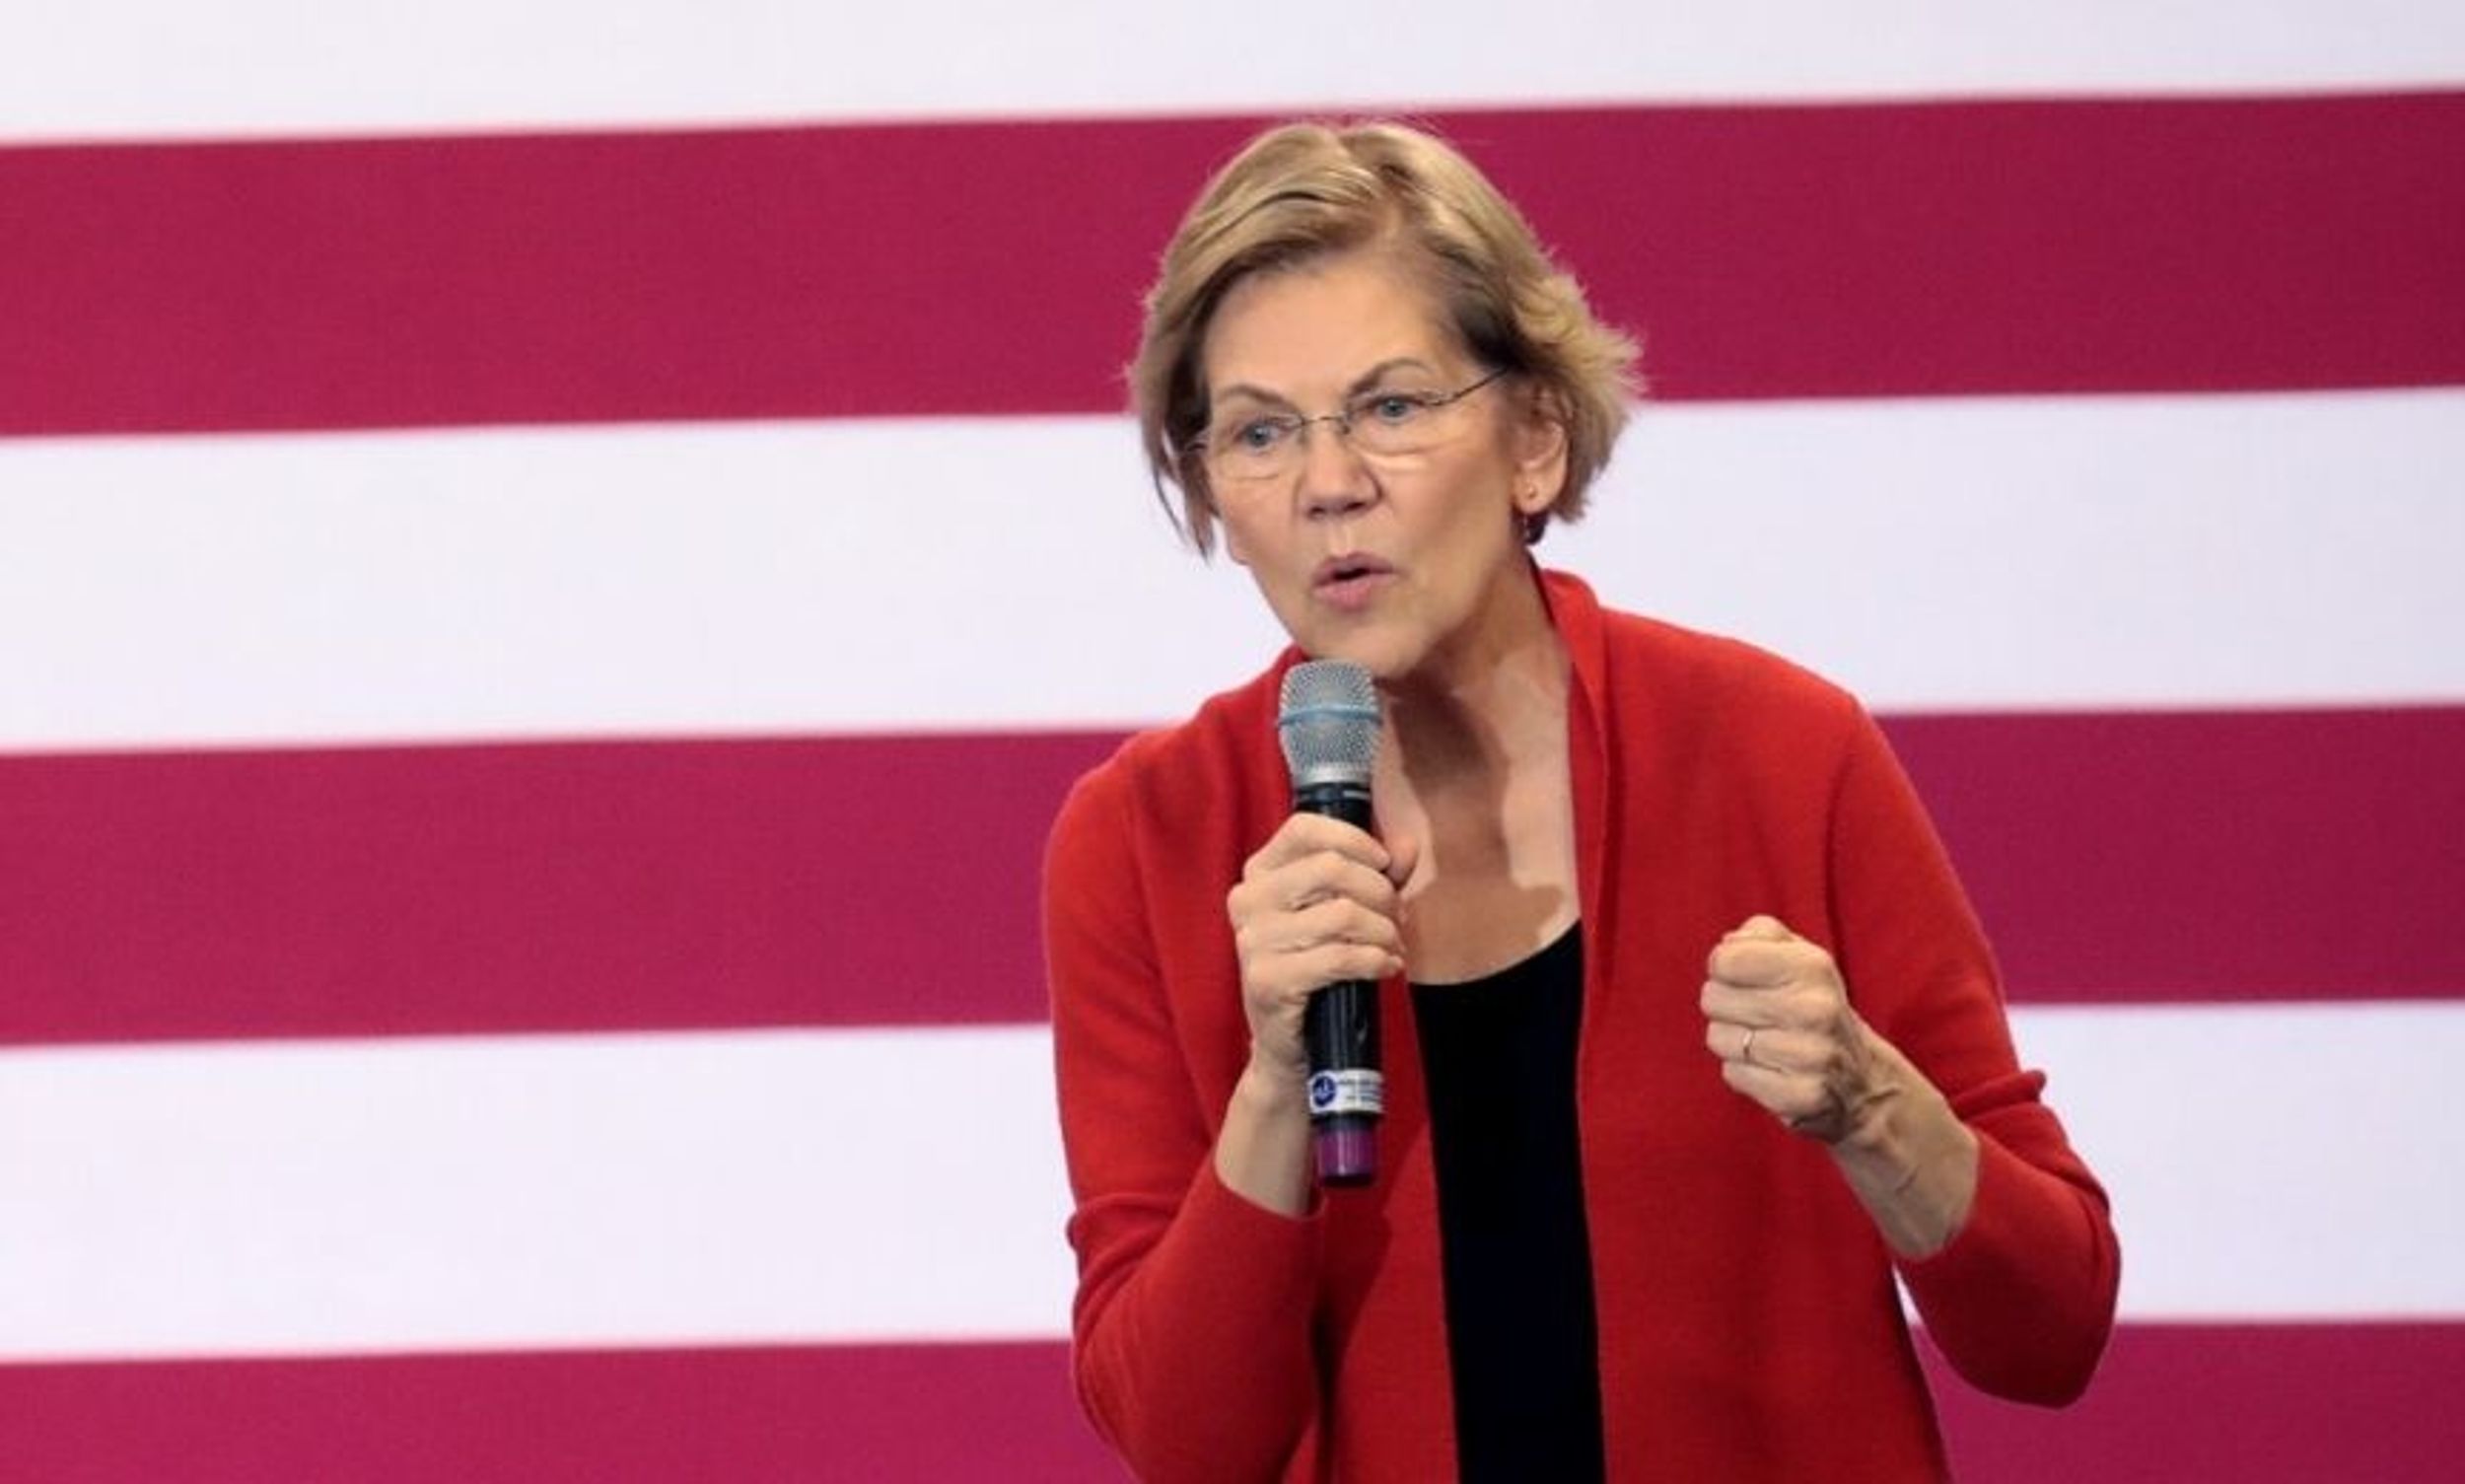 Elizabeth Warren Has the Perfect Response When Asked Who Her Mike Pence Will Be to Look At Her 'With Adoring Eyes'